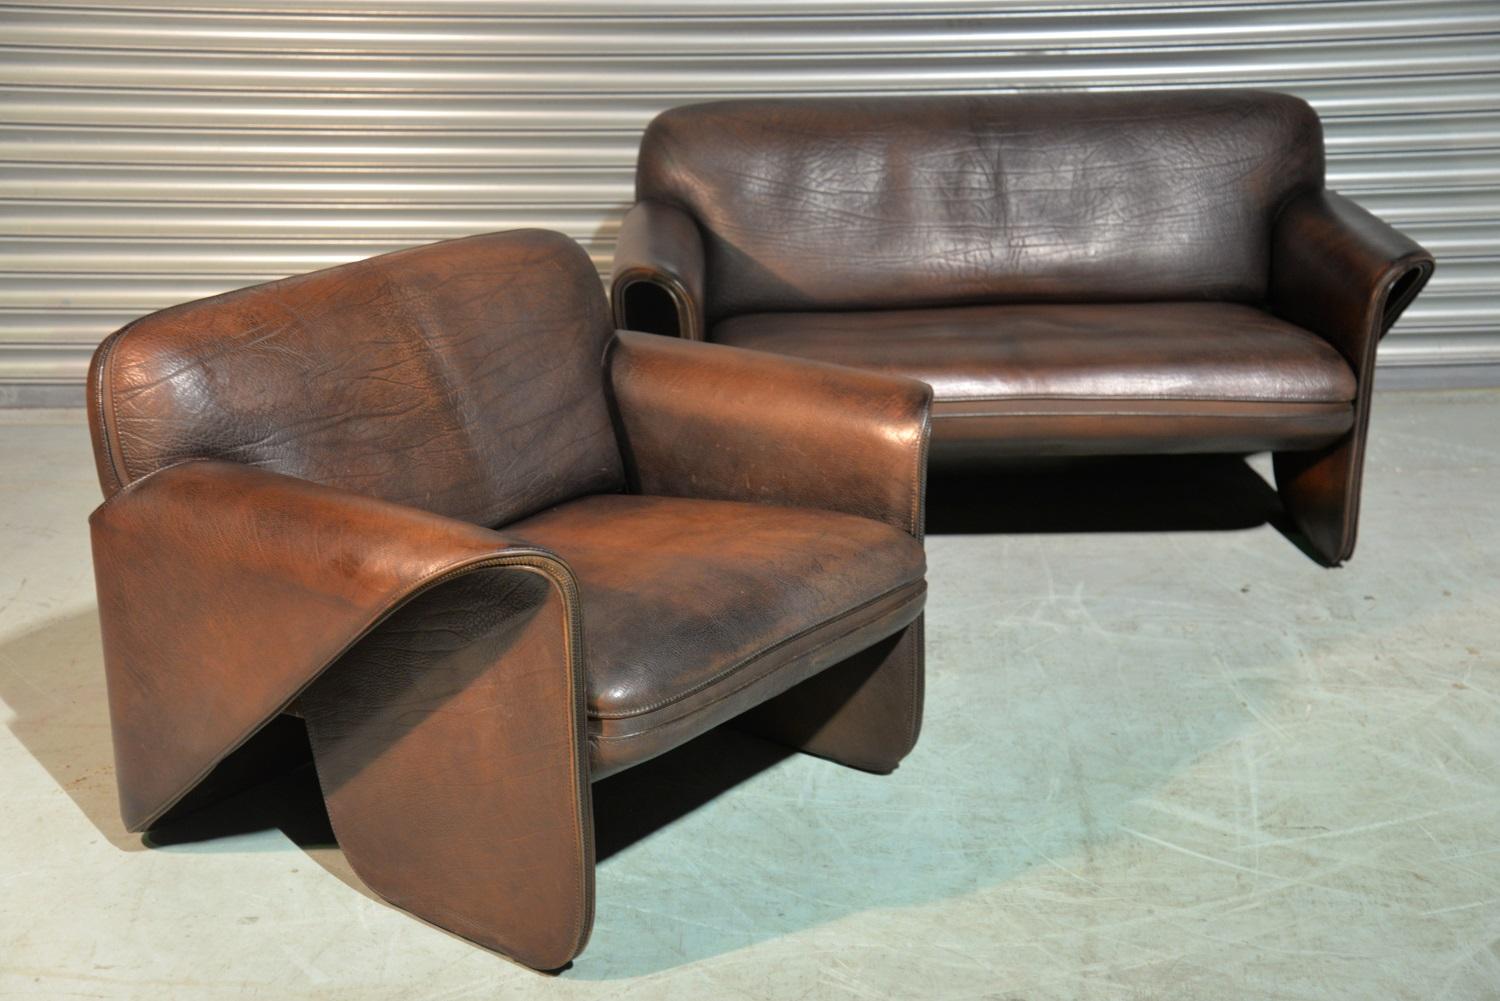 Discounted airfreight for our US and International customers (from 2 weeks door to door)

We are delighted to bring to you an ultra rare vintage De Sede DS 125 sofa and armchair designed by Gerd Lange in 1978. These sculptural pieces are upholstered